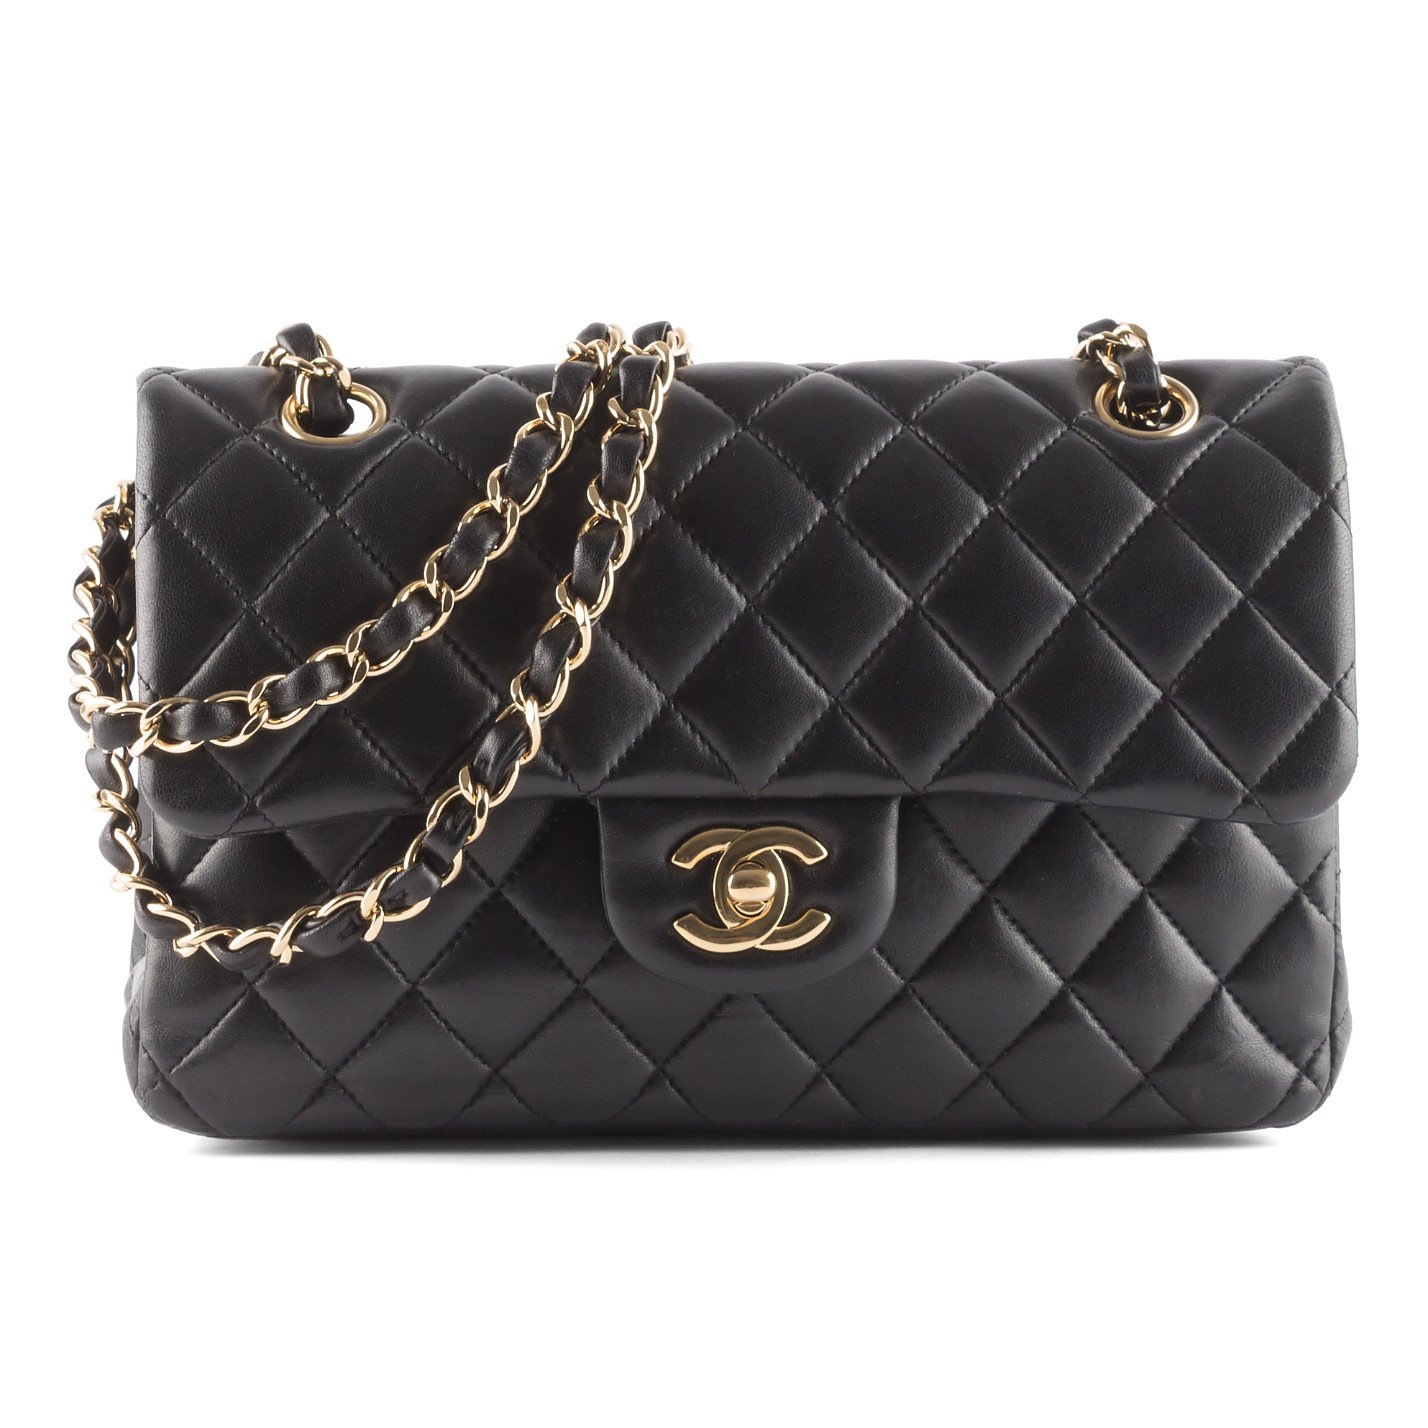 Chanel Bags Under 2000 Factory Sale, SAVE 54%.